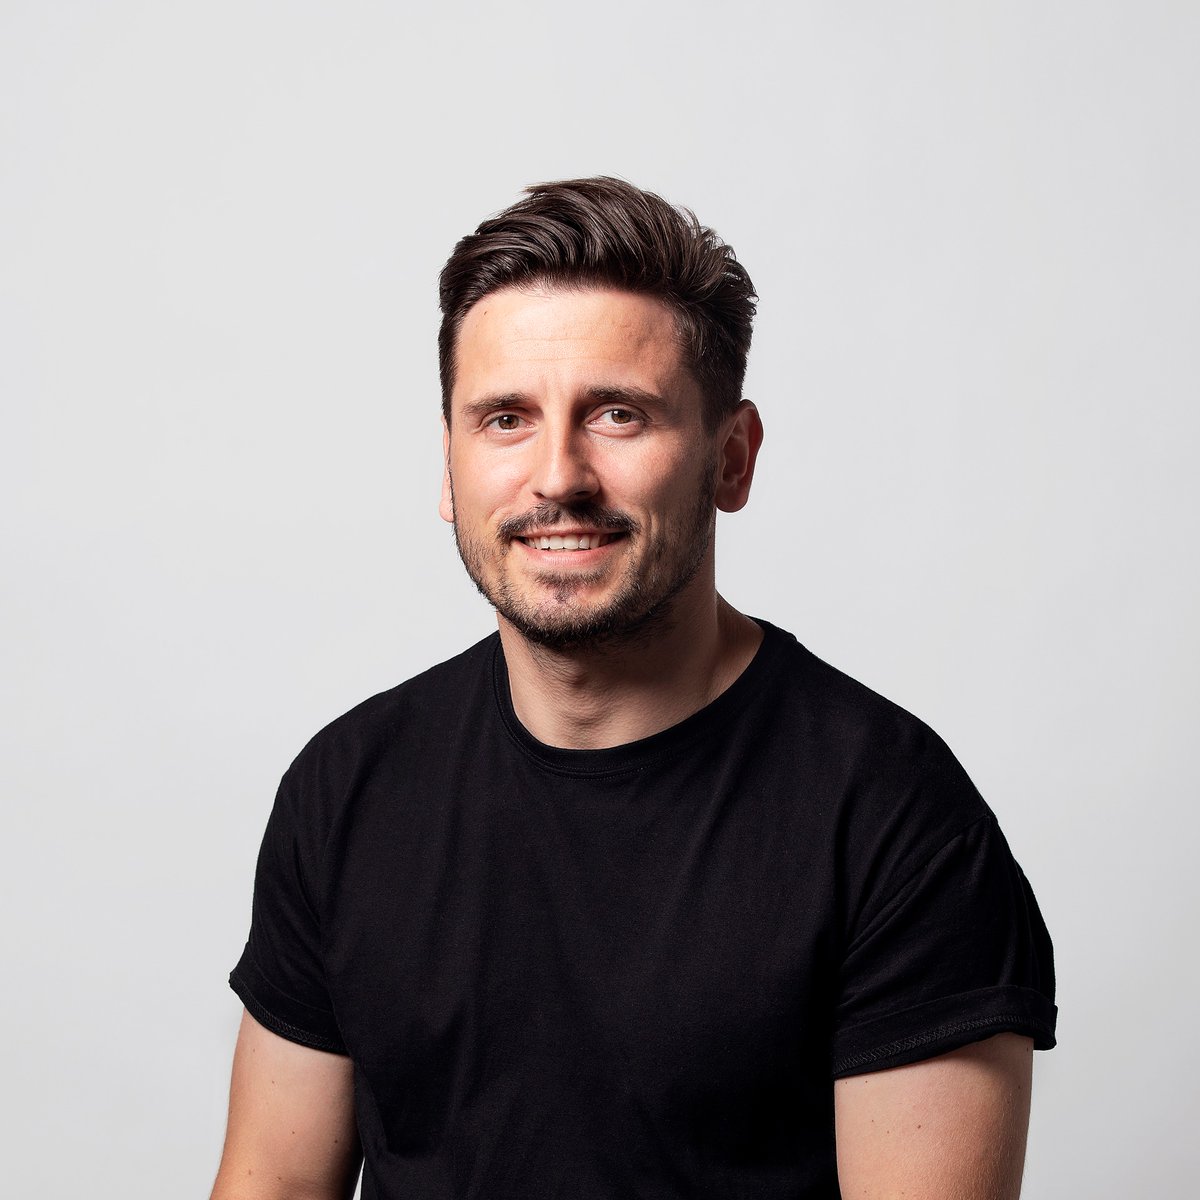 Congrats to @Eldin_Fetahovic at @BoomerangCreate for being selected as a jury member for the @Digiday Media Awards Europe 2022. Shortlist gets announced soon!

digiday.secure-platform.com/a/page/digiday…

#futurefit #DigidayMediaAwards #media